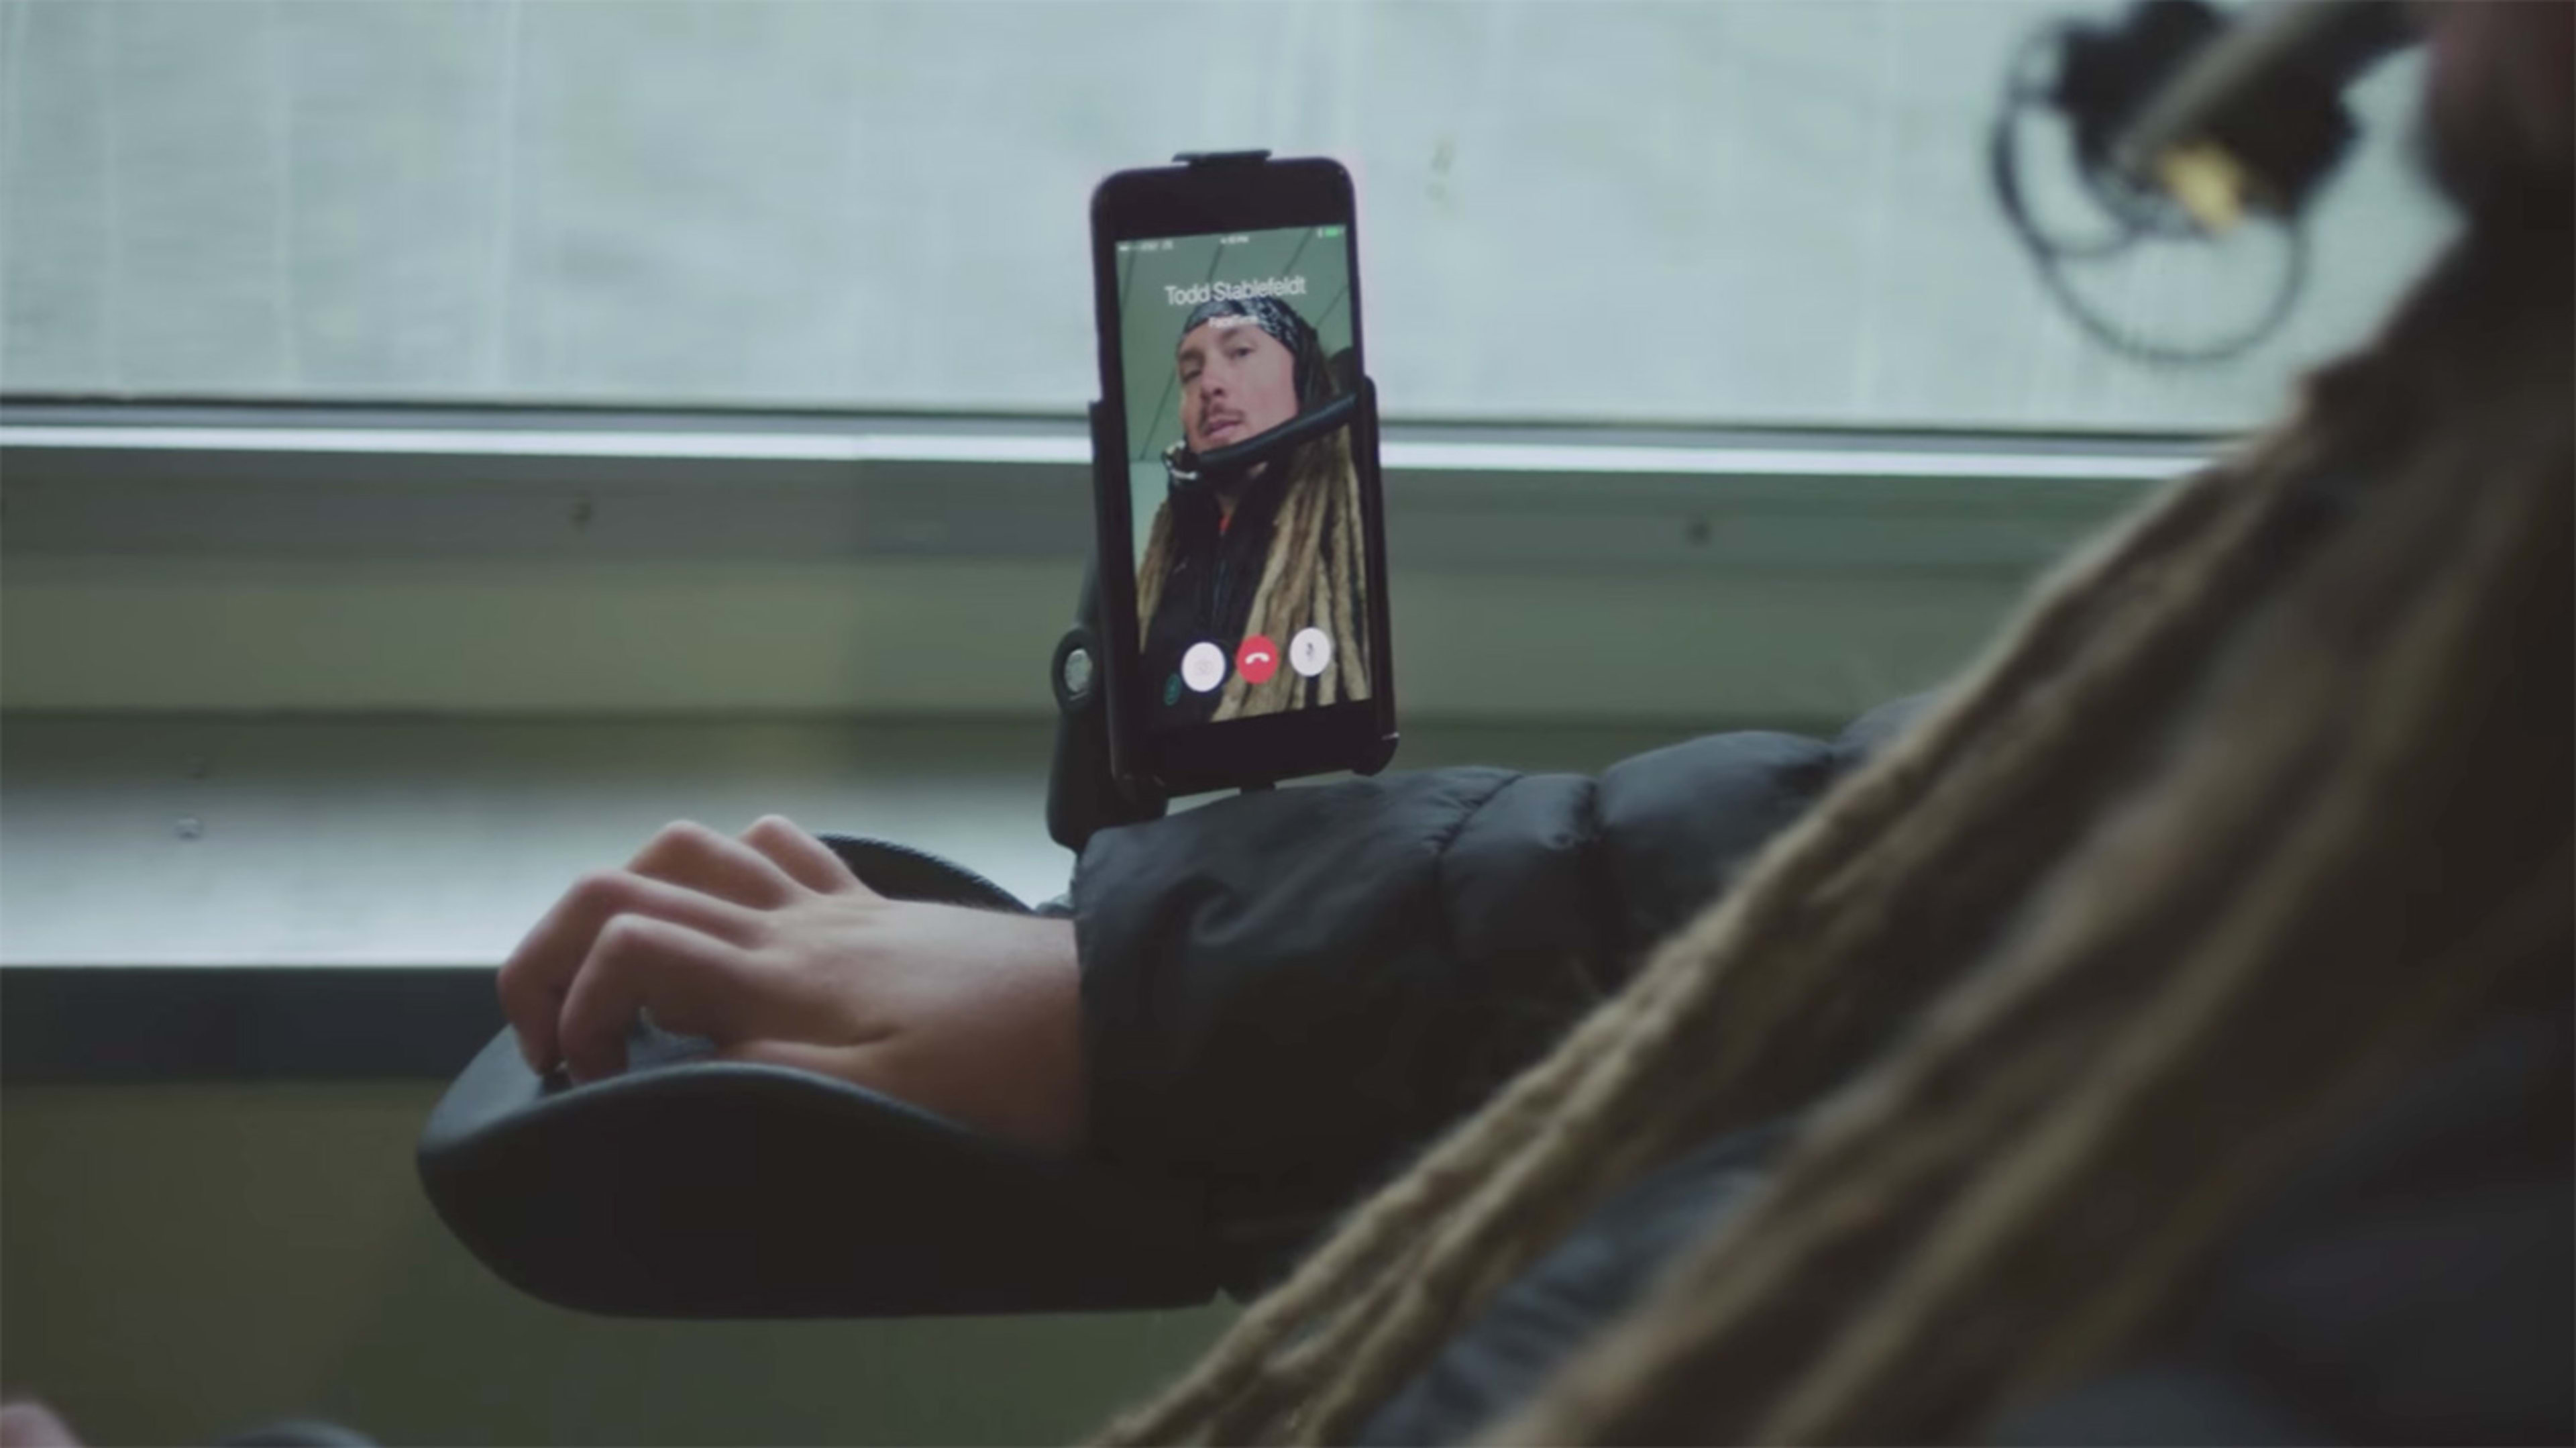 New Apple Ads Show How Accessible Tech Helps People Living With Disabilities